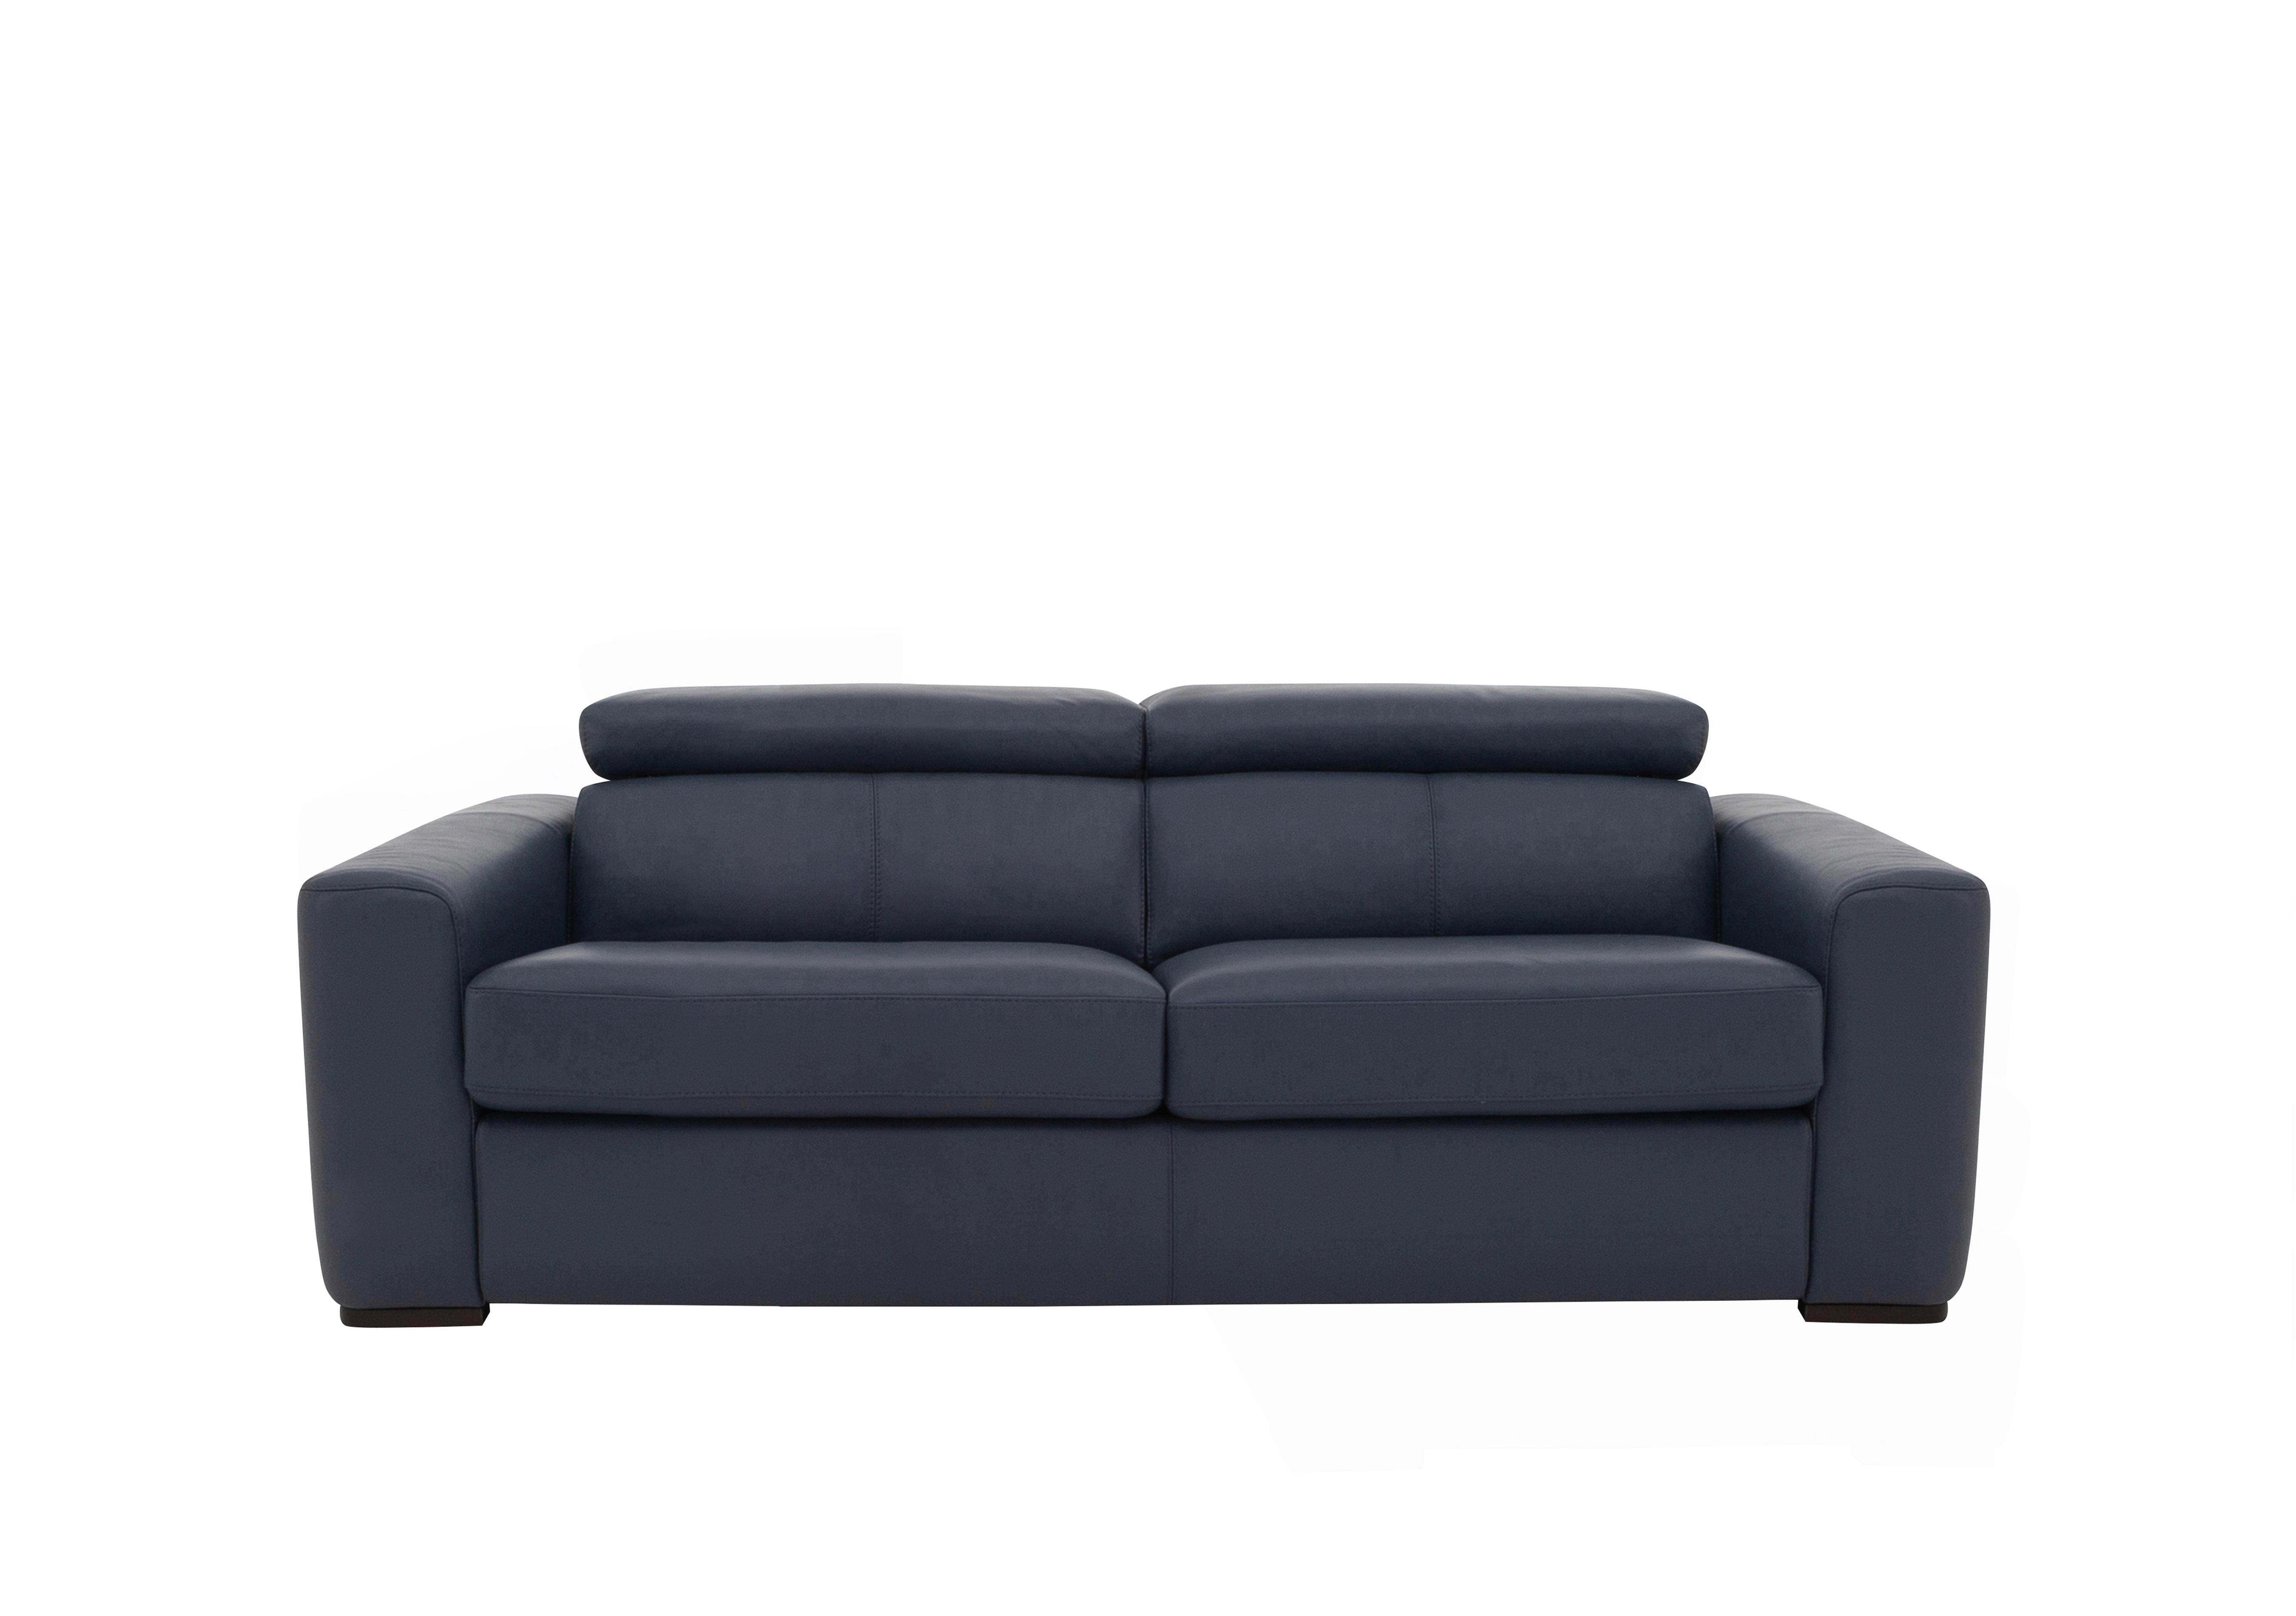 Infinity 3 Seater Leather Sofa Bed in Nc-313e Ocean Blue on Furniture Village